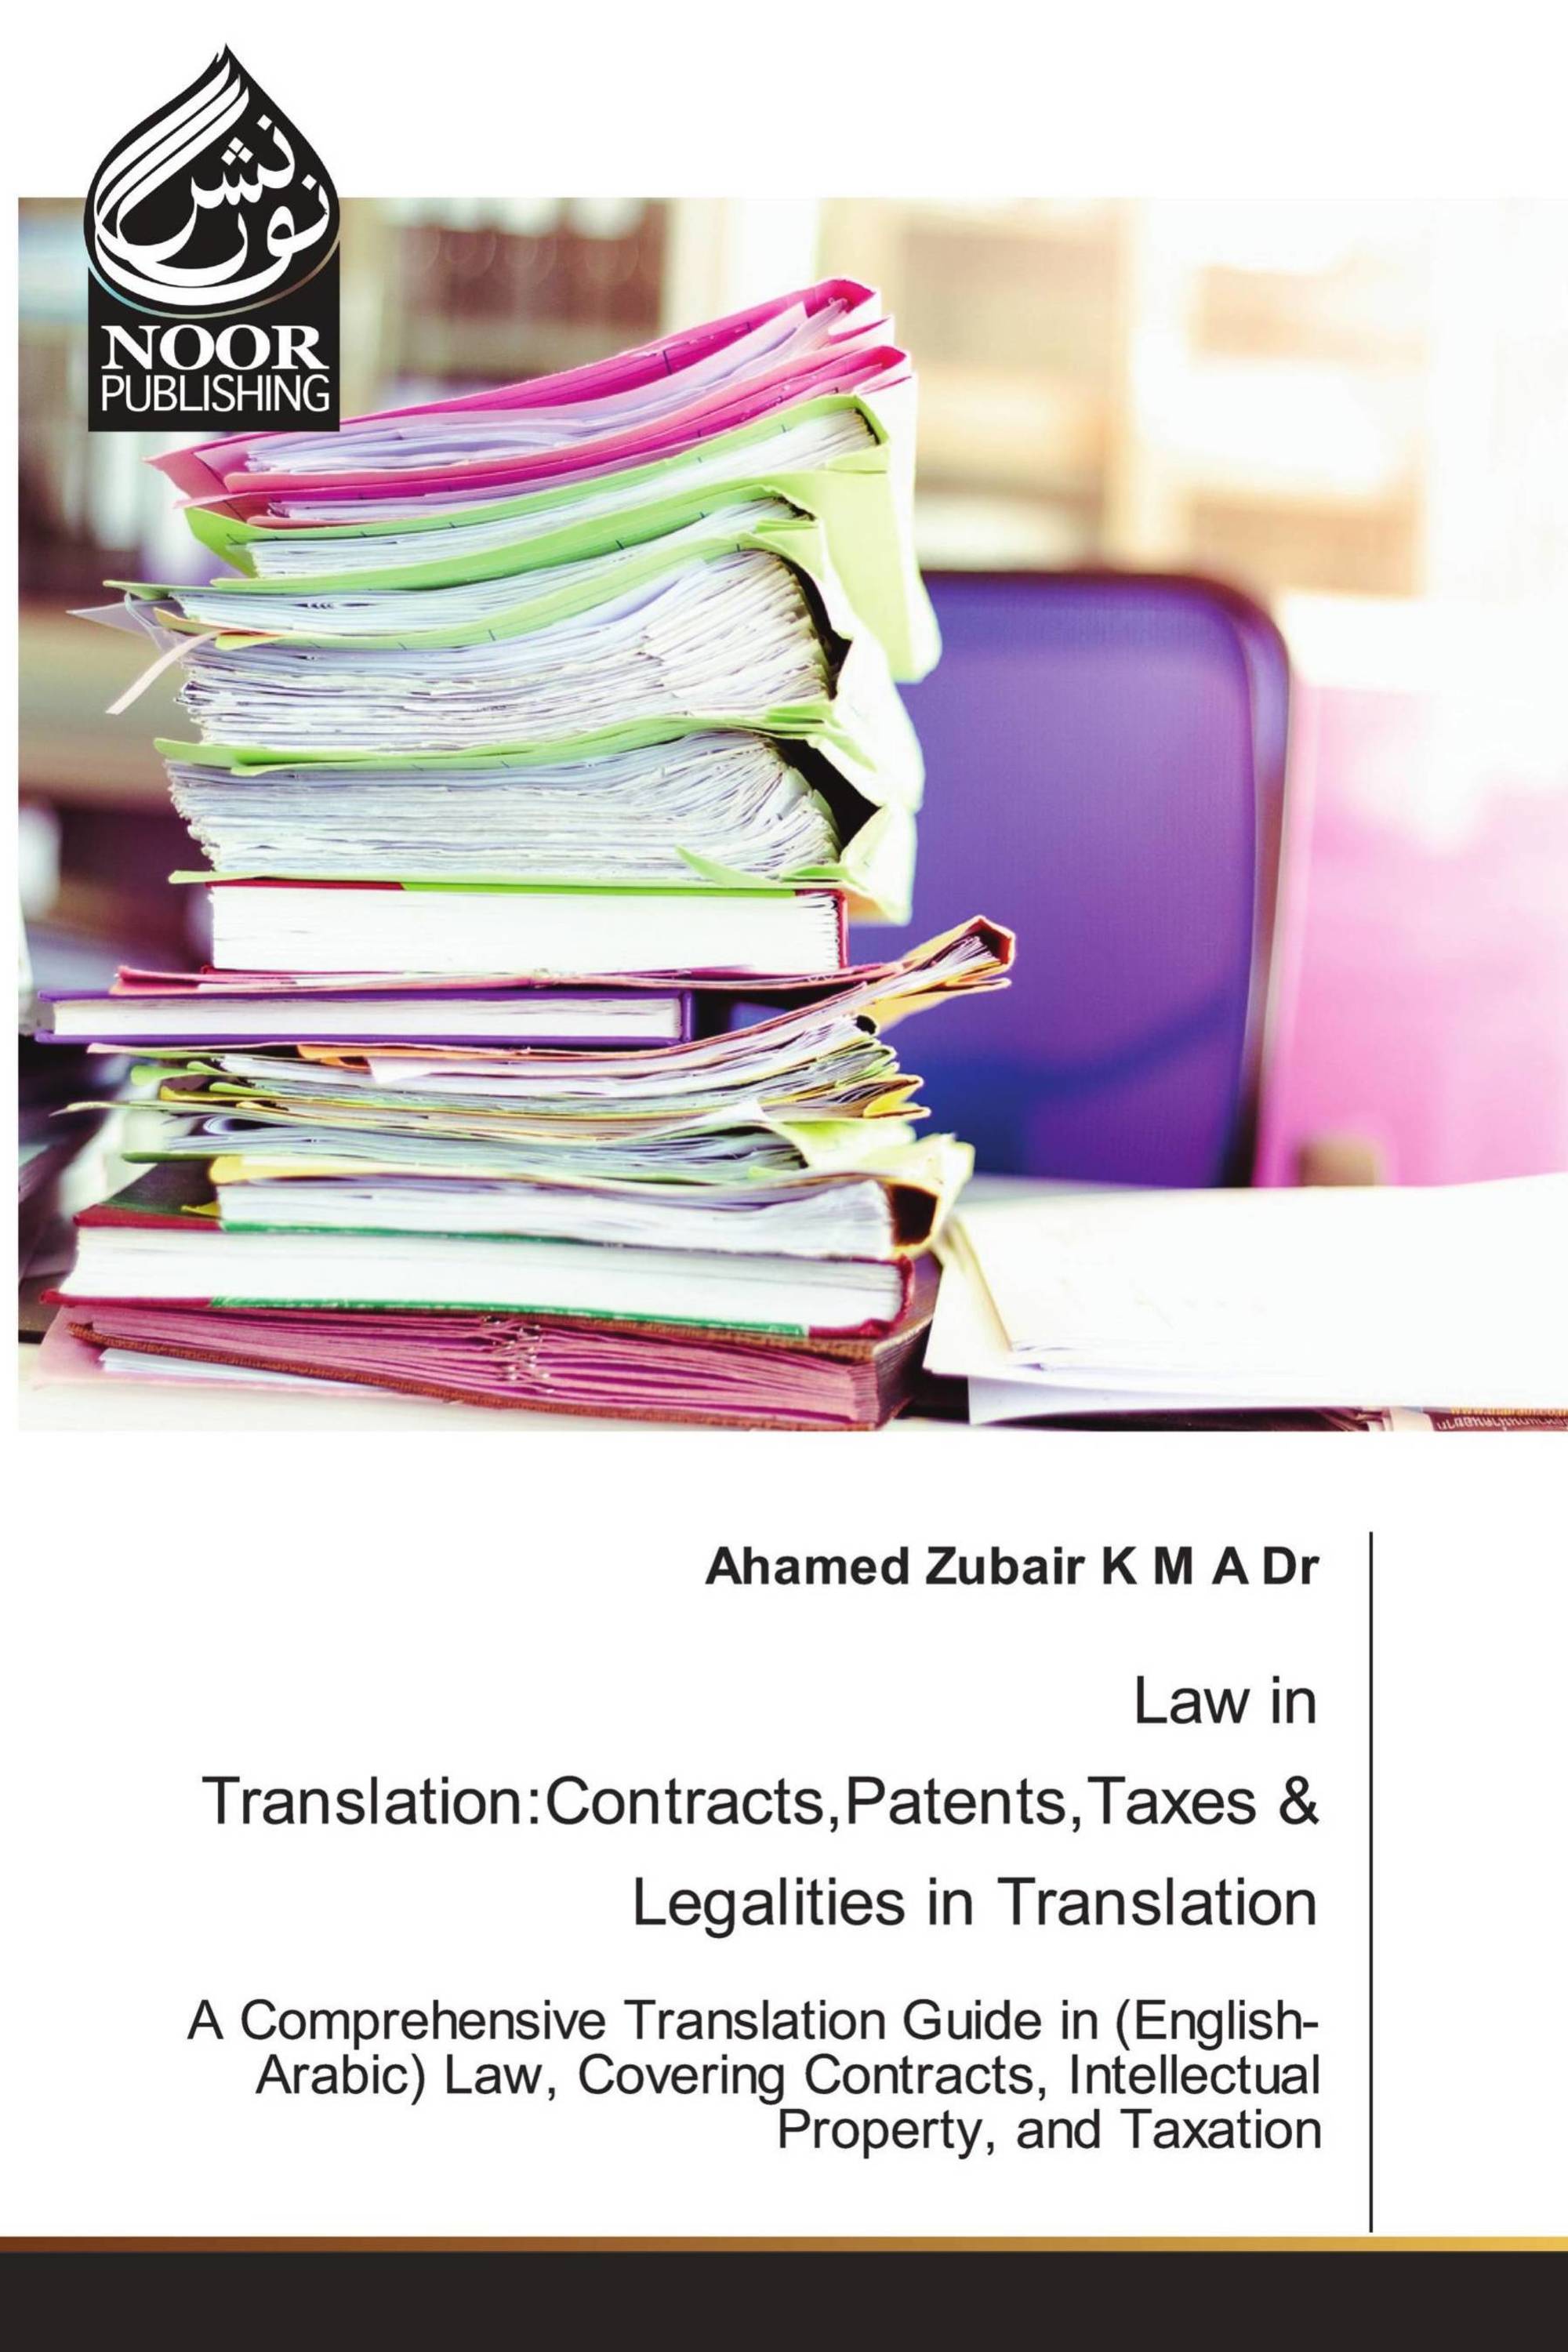 Law in Translation:Contracts,Patents,Taxes & Legalities in Translation